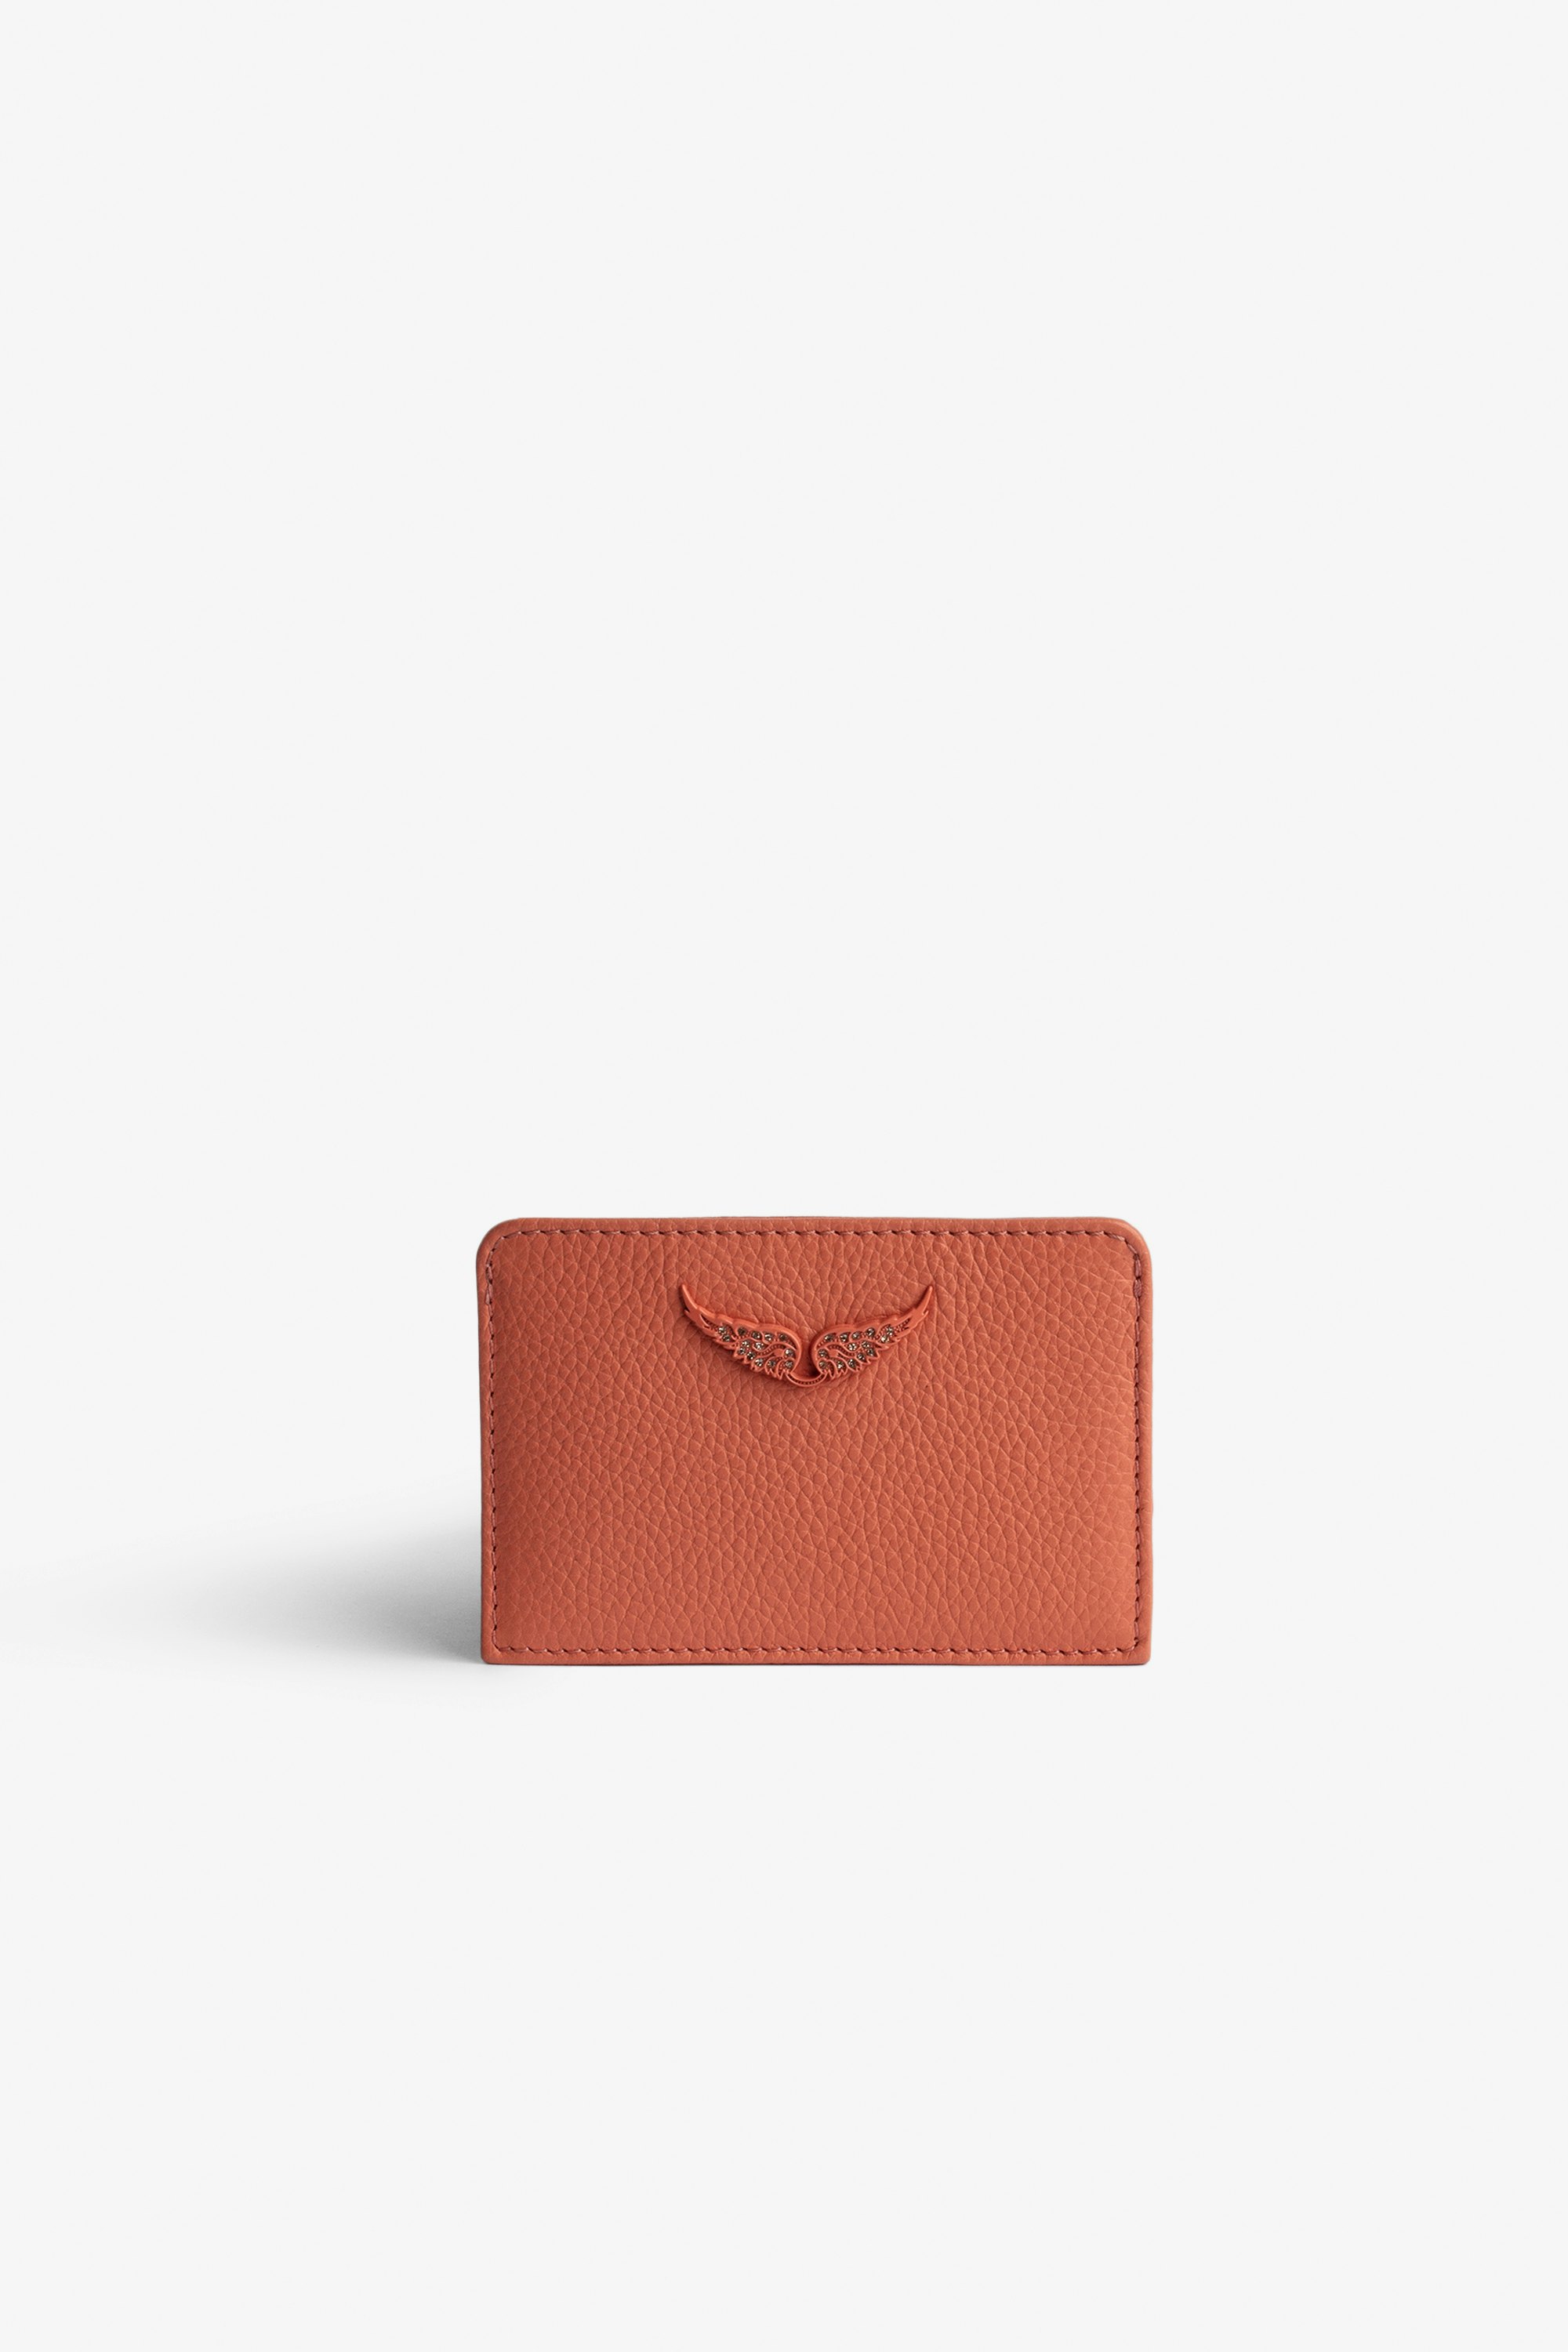 ZV Pass Card Case Women's card case in orange grained leather with 2 slots